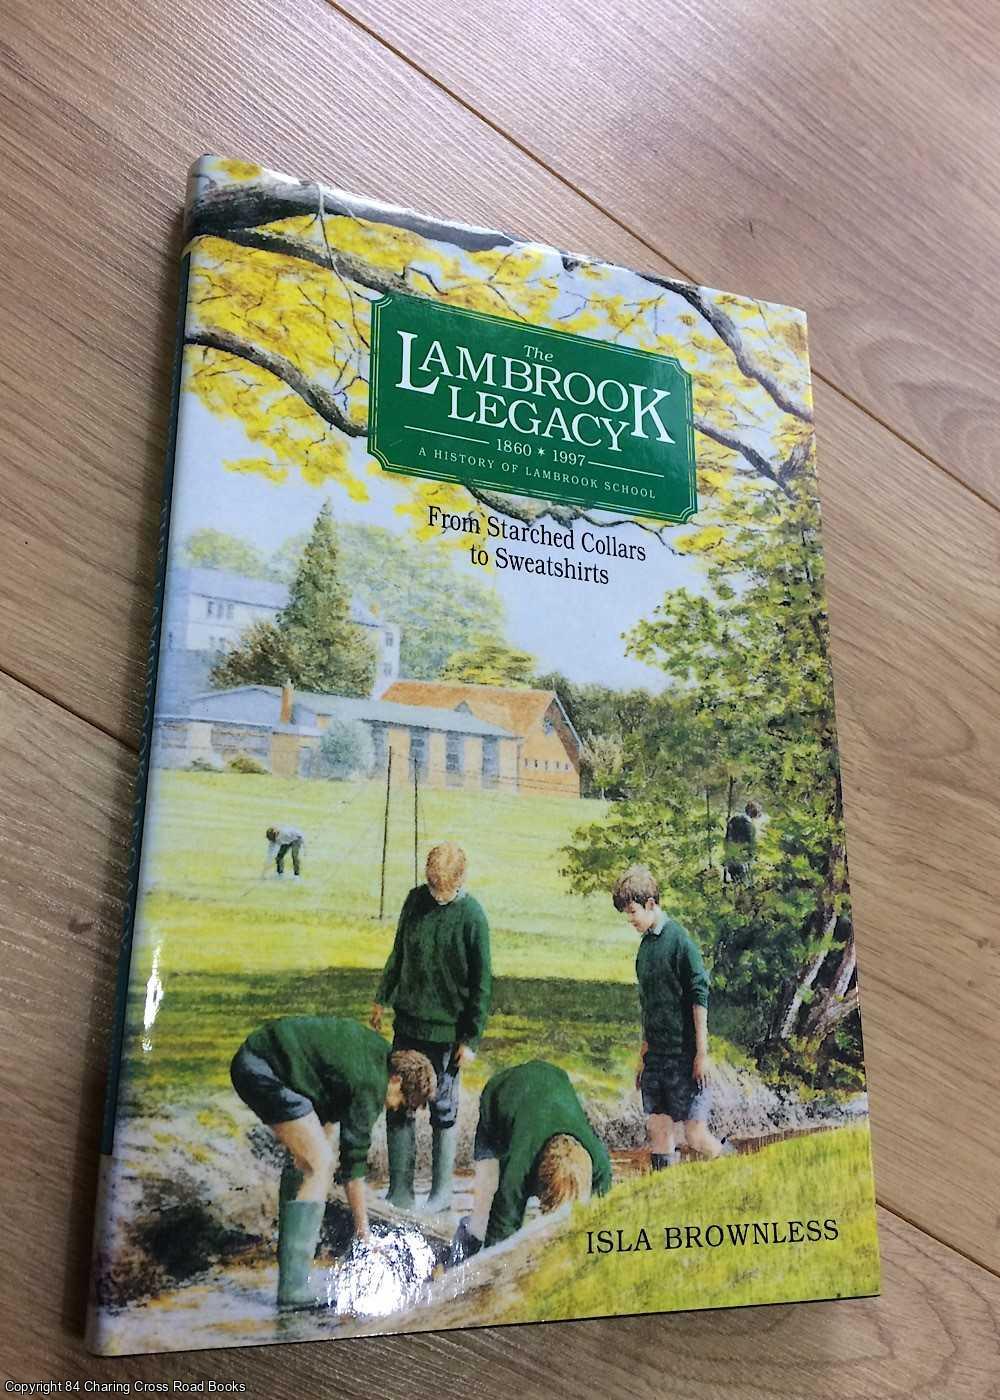 Isla Brownless - The Lambrook Legacy 1860 - 1997: A History of Lambrook School from Starched Collars to Sweatshirts